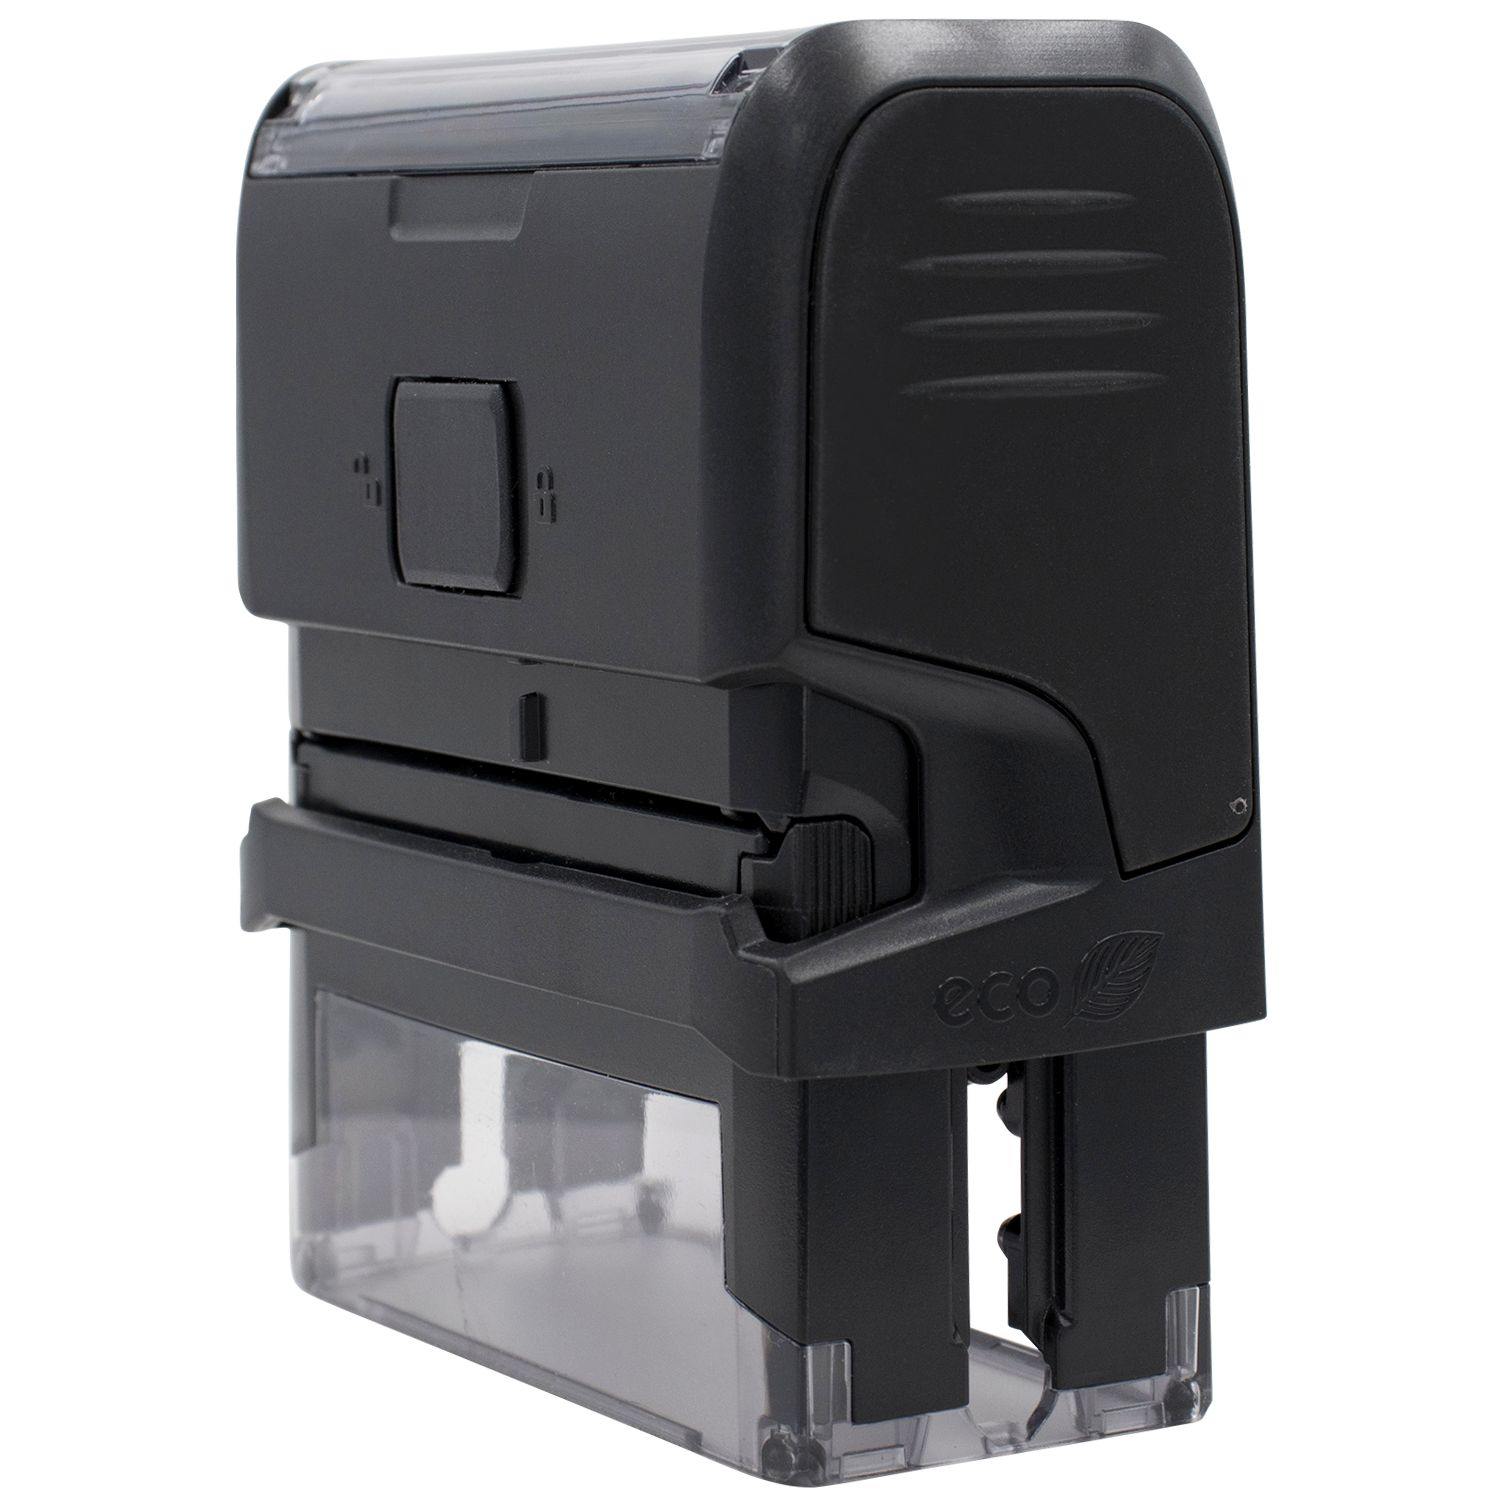 Side View of Large Self Inking Advance Directive Stamp at an Angle